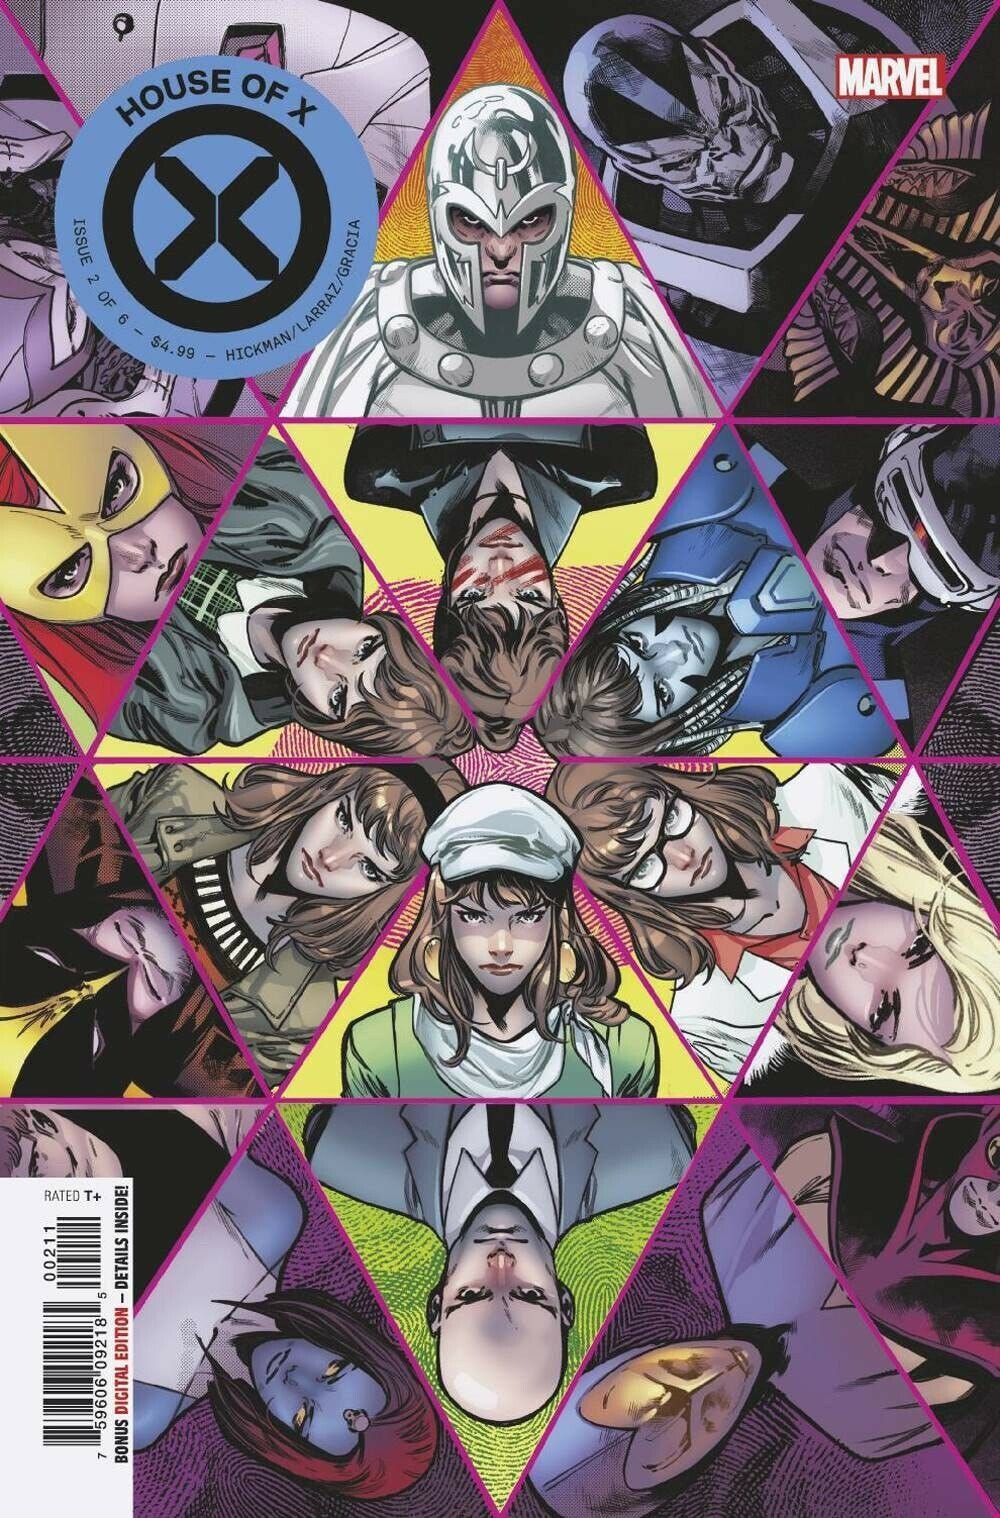 Marvel House of X #2 Comic Book - Picture 1 of 1